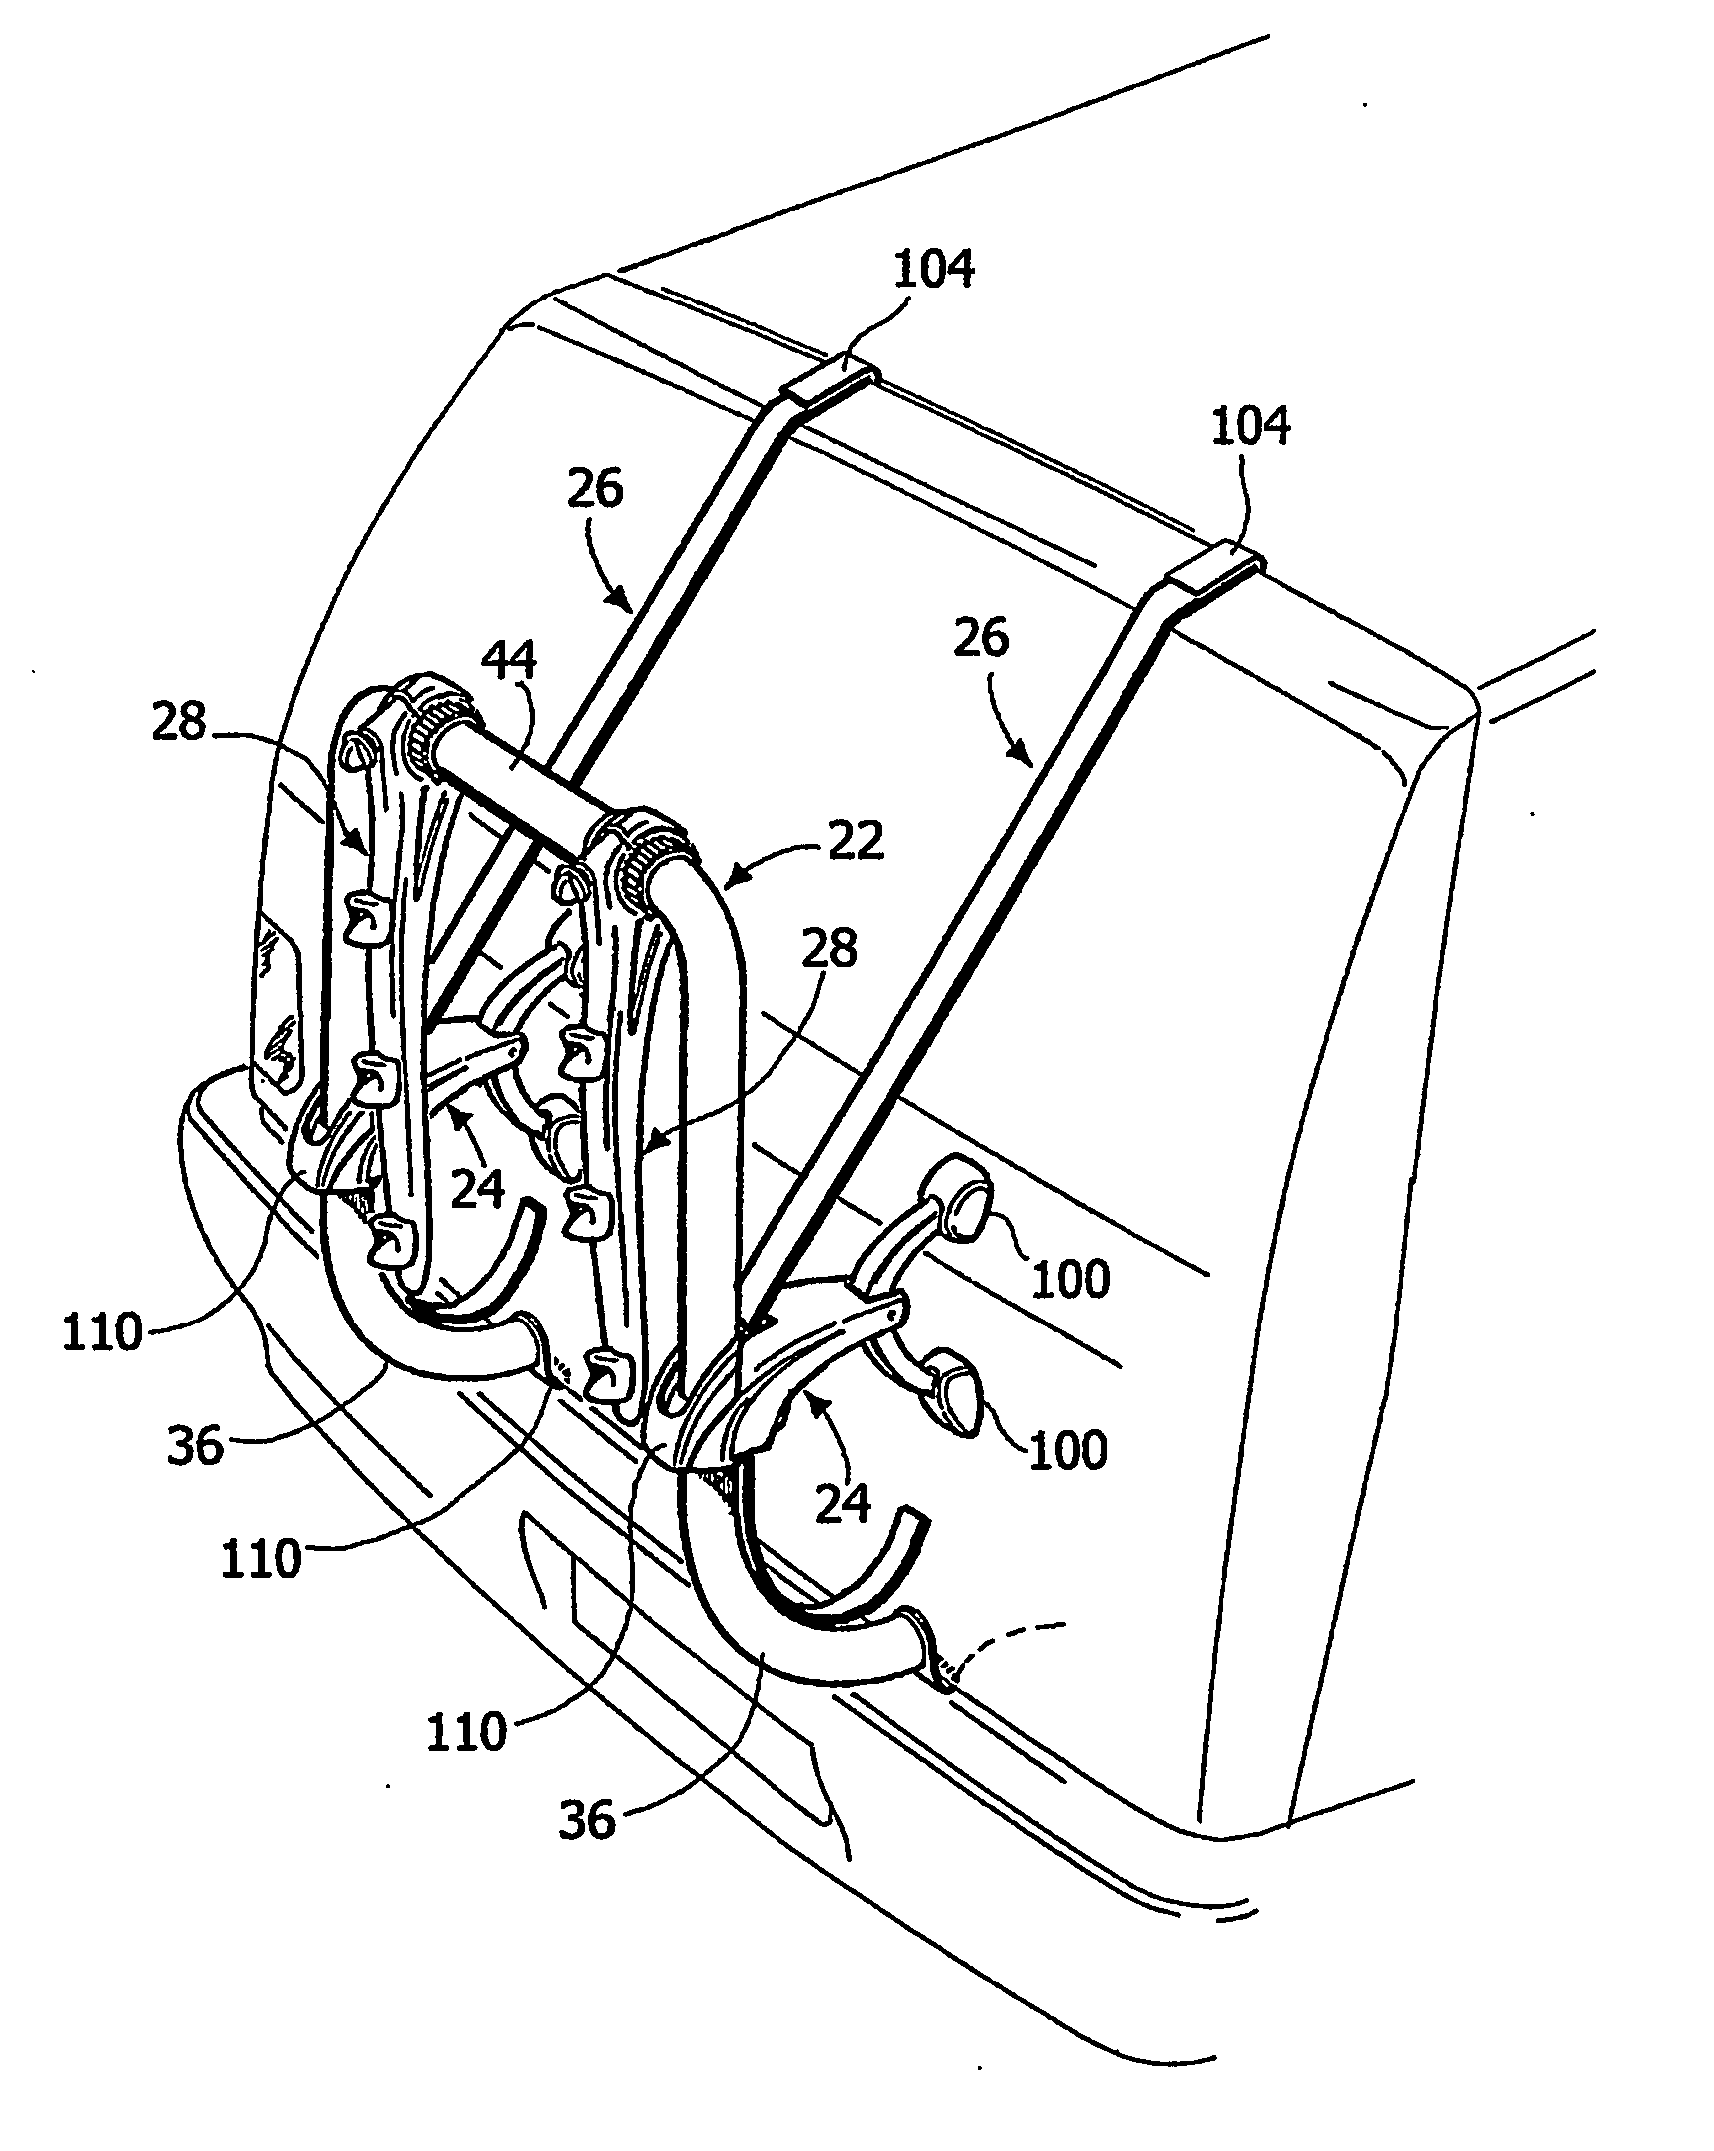 Vehicle-mounted equipment carrier